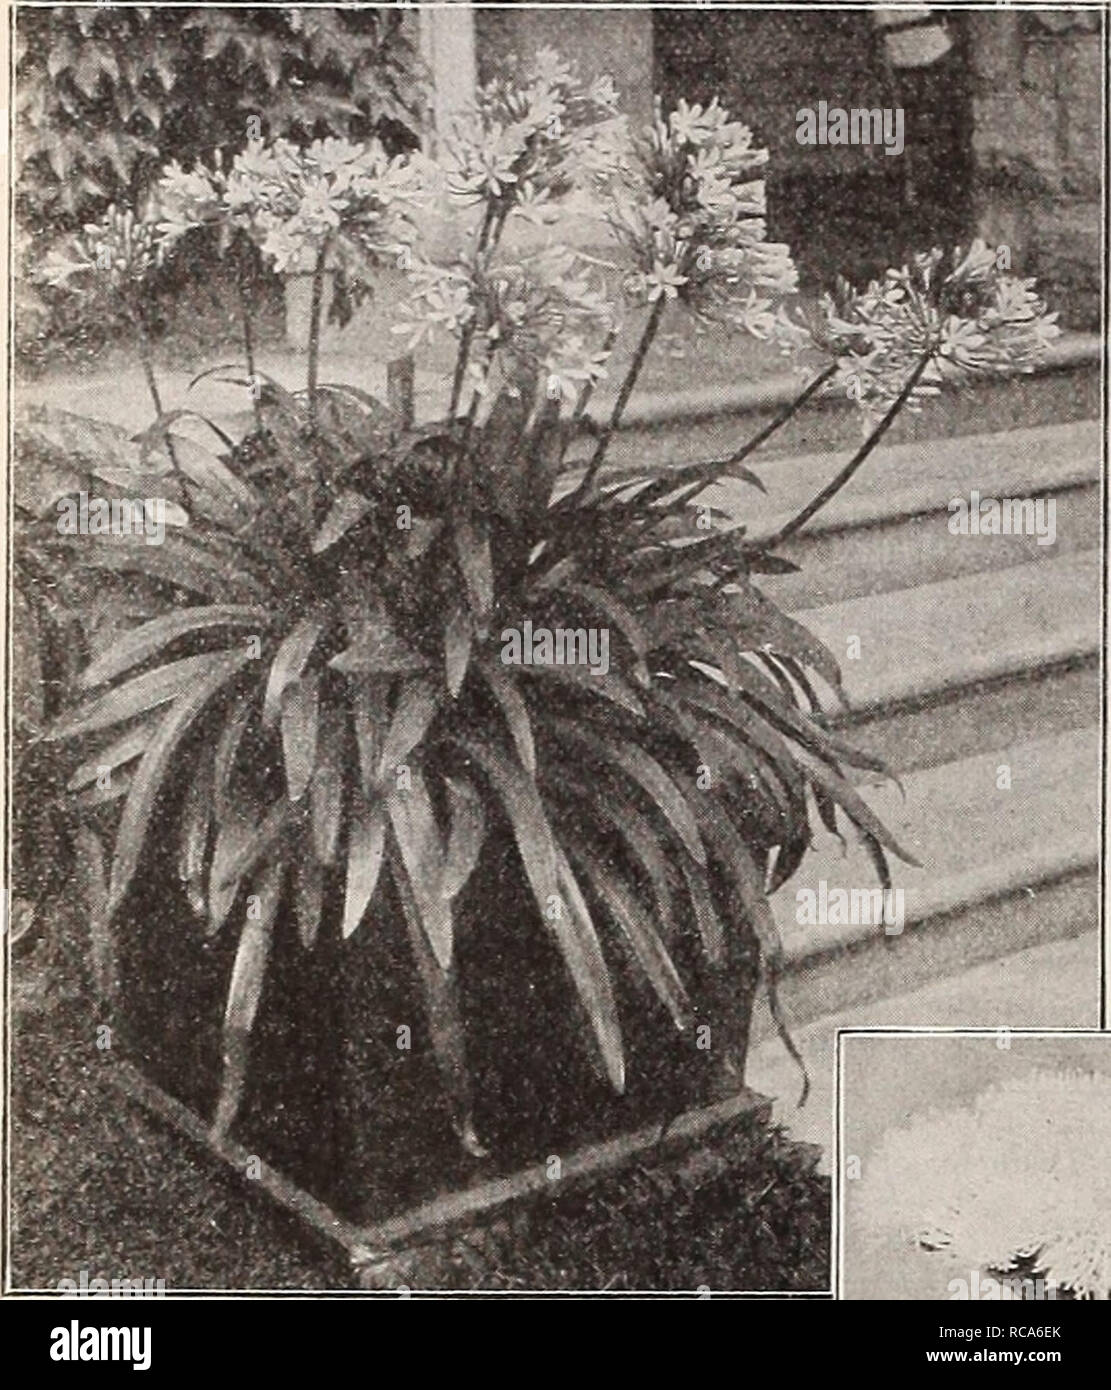 . Dreer's garden book : seventy-third annual edition 1911. Seeds Catalogs; Nursery stock Catalogs; Gardening Equipment and supplies Catalogs; Flowers Seeds Catalogs; Vegetables Seeds Catalogs; Fruit Seeds Catalogs. I34fffirHMrADRfER -PHILADELPHIA•PA^r(JARDtH^OIlKHHOiKt PLAMTSI. Agekatum. Agapanihus Umbellatus. AGAPANTHUS. Umbellatus (Blue Lily of the Nile). A splendid ornamental plant, bearing clusters of bright blue flowers on long flower stalks and lasting a long time in bloom. A most desirable plant for outdoor decoration, planted in large pots or tubs on the lawn or piazza. — Alba. A white Stock Photo